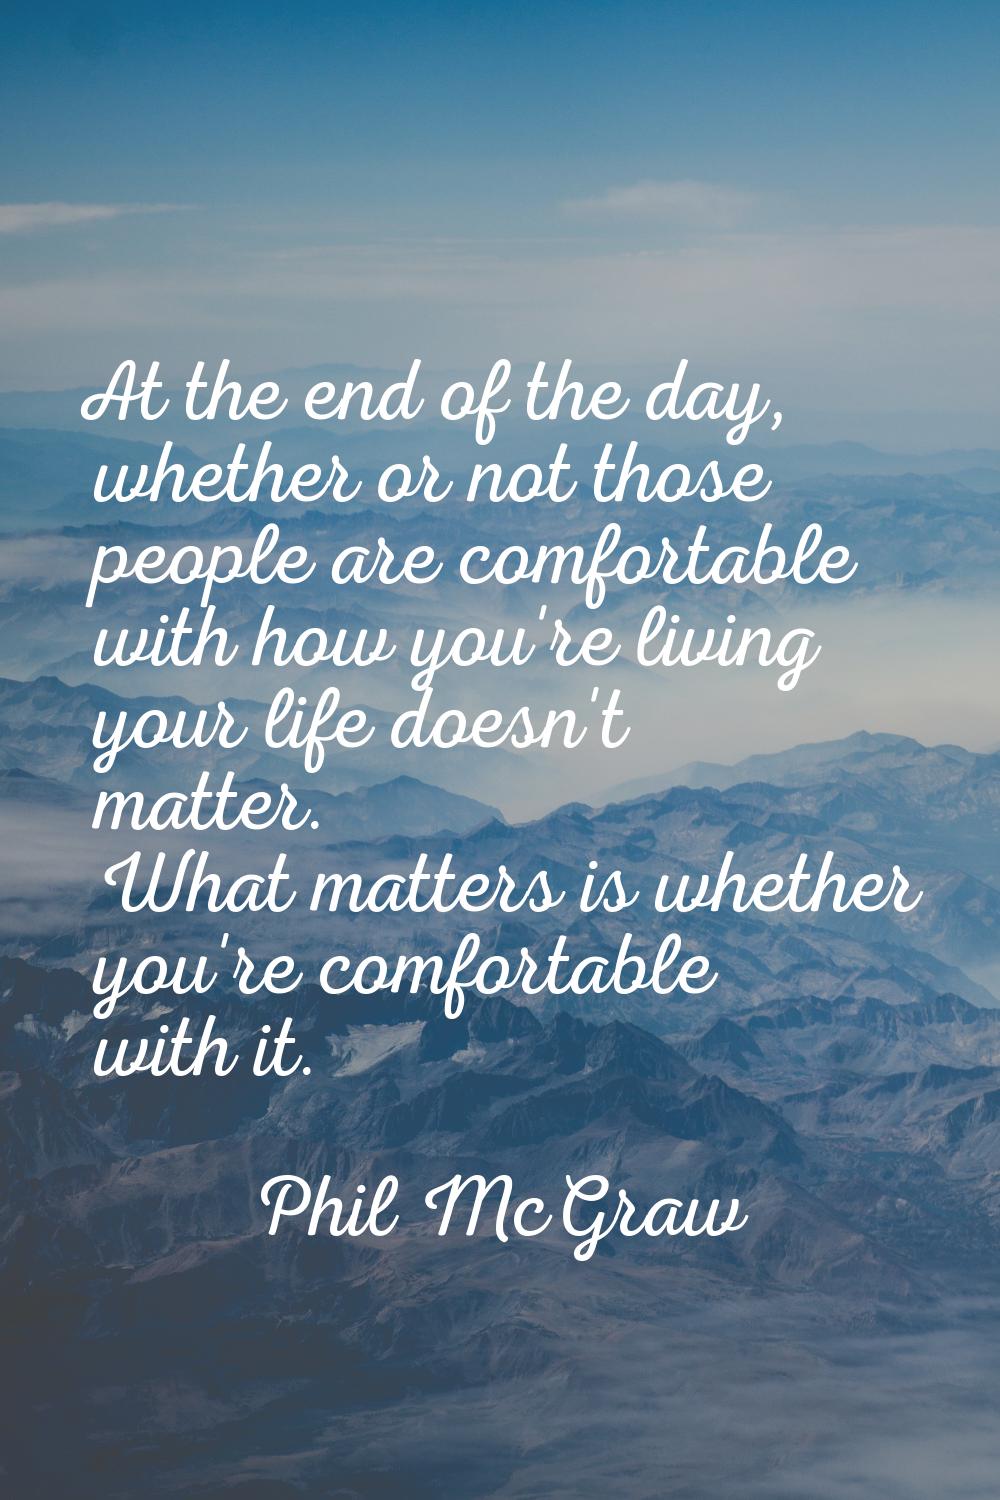 At the end of the day, whether or not those people are comfortable with how you're living your life